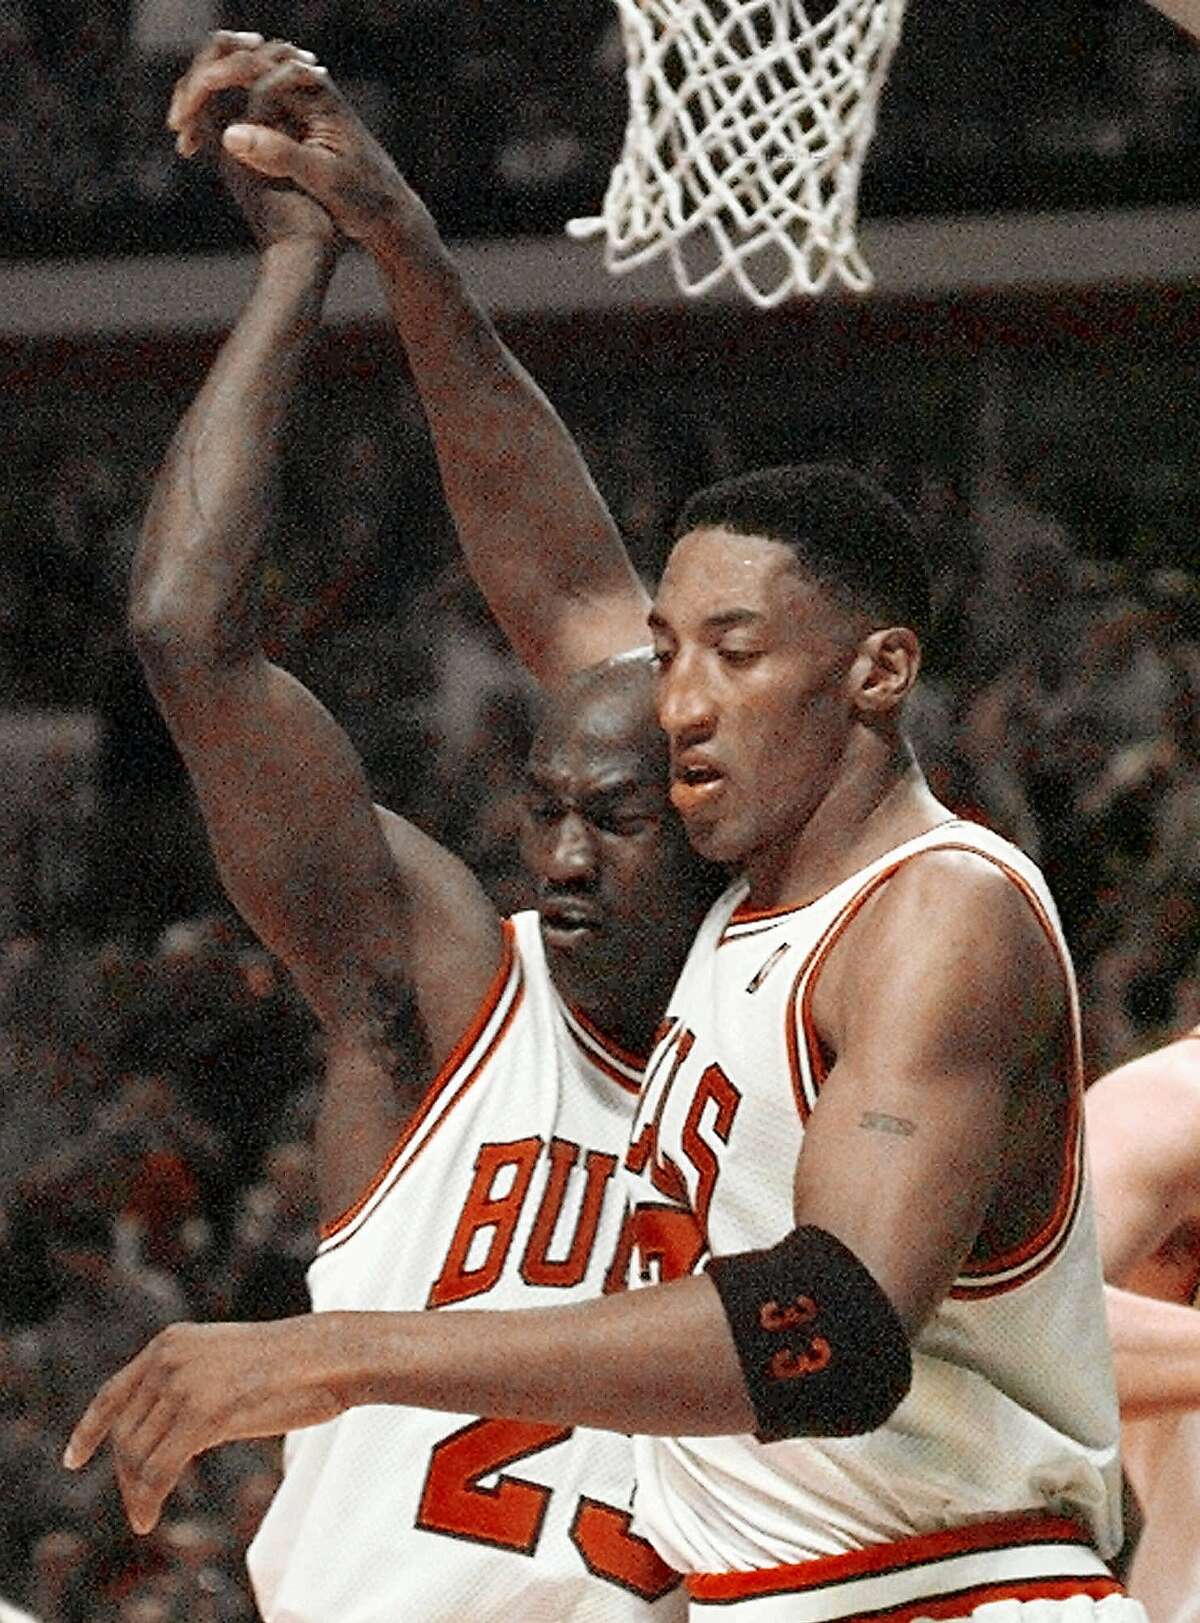 Chicago Bulls' Michael Jordan (23) congratulates Scottie Pippen (33) after Pippen scored and drew a foul late in the fourth quarter of Game 7 of the Eastern Conference Finals Sunday, May 31, 1998, in Chicago. The Bulls defeated the Pacers 88-83 to advance to the NBA Finals against the Utah Jazz. (AP Photo/Fred Jewell)